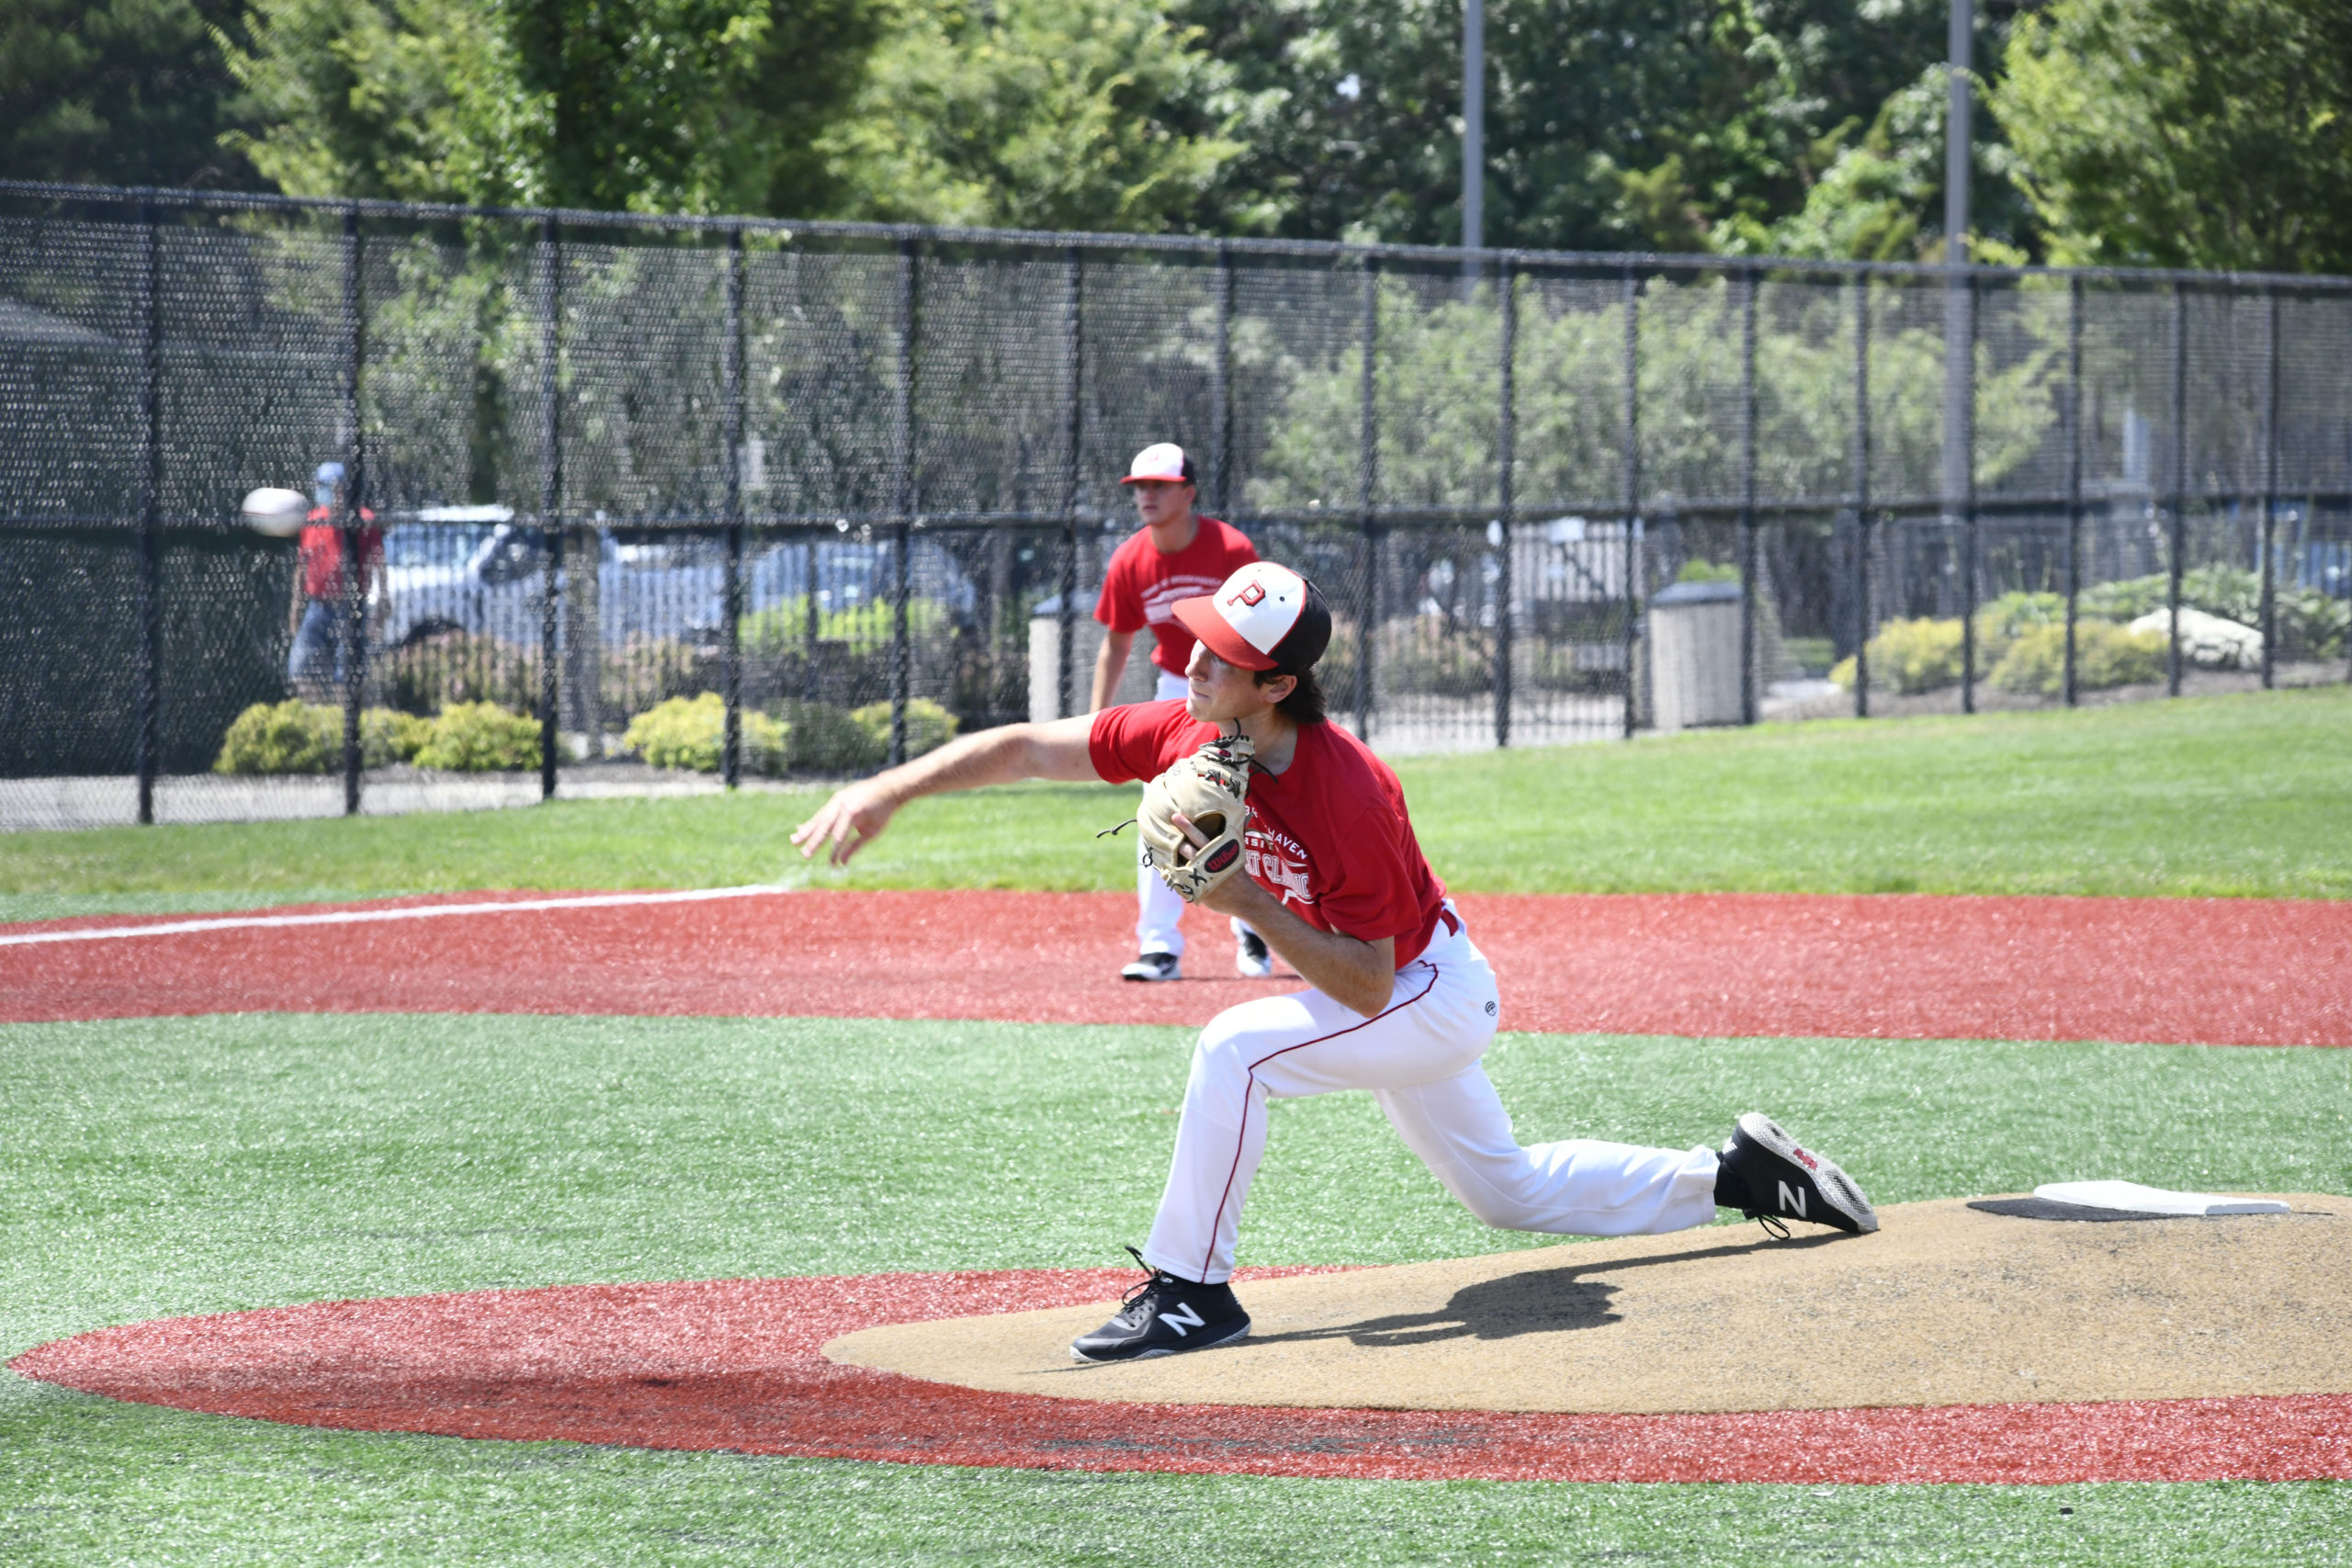 The Southampton and Pierson High School baseball teams faced off against each other in Moriches on Monday. DANA SHAW